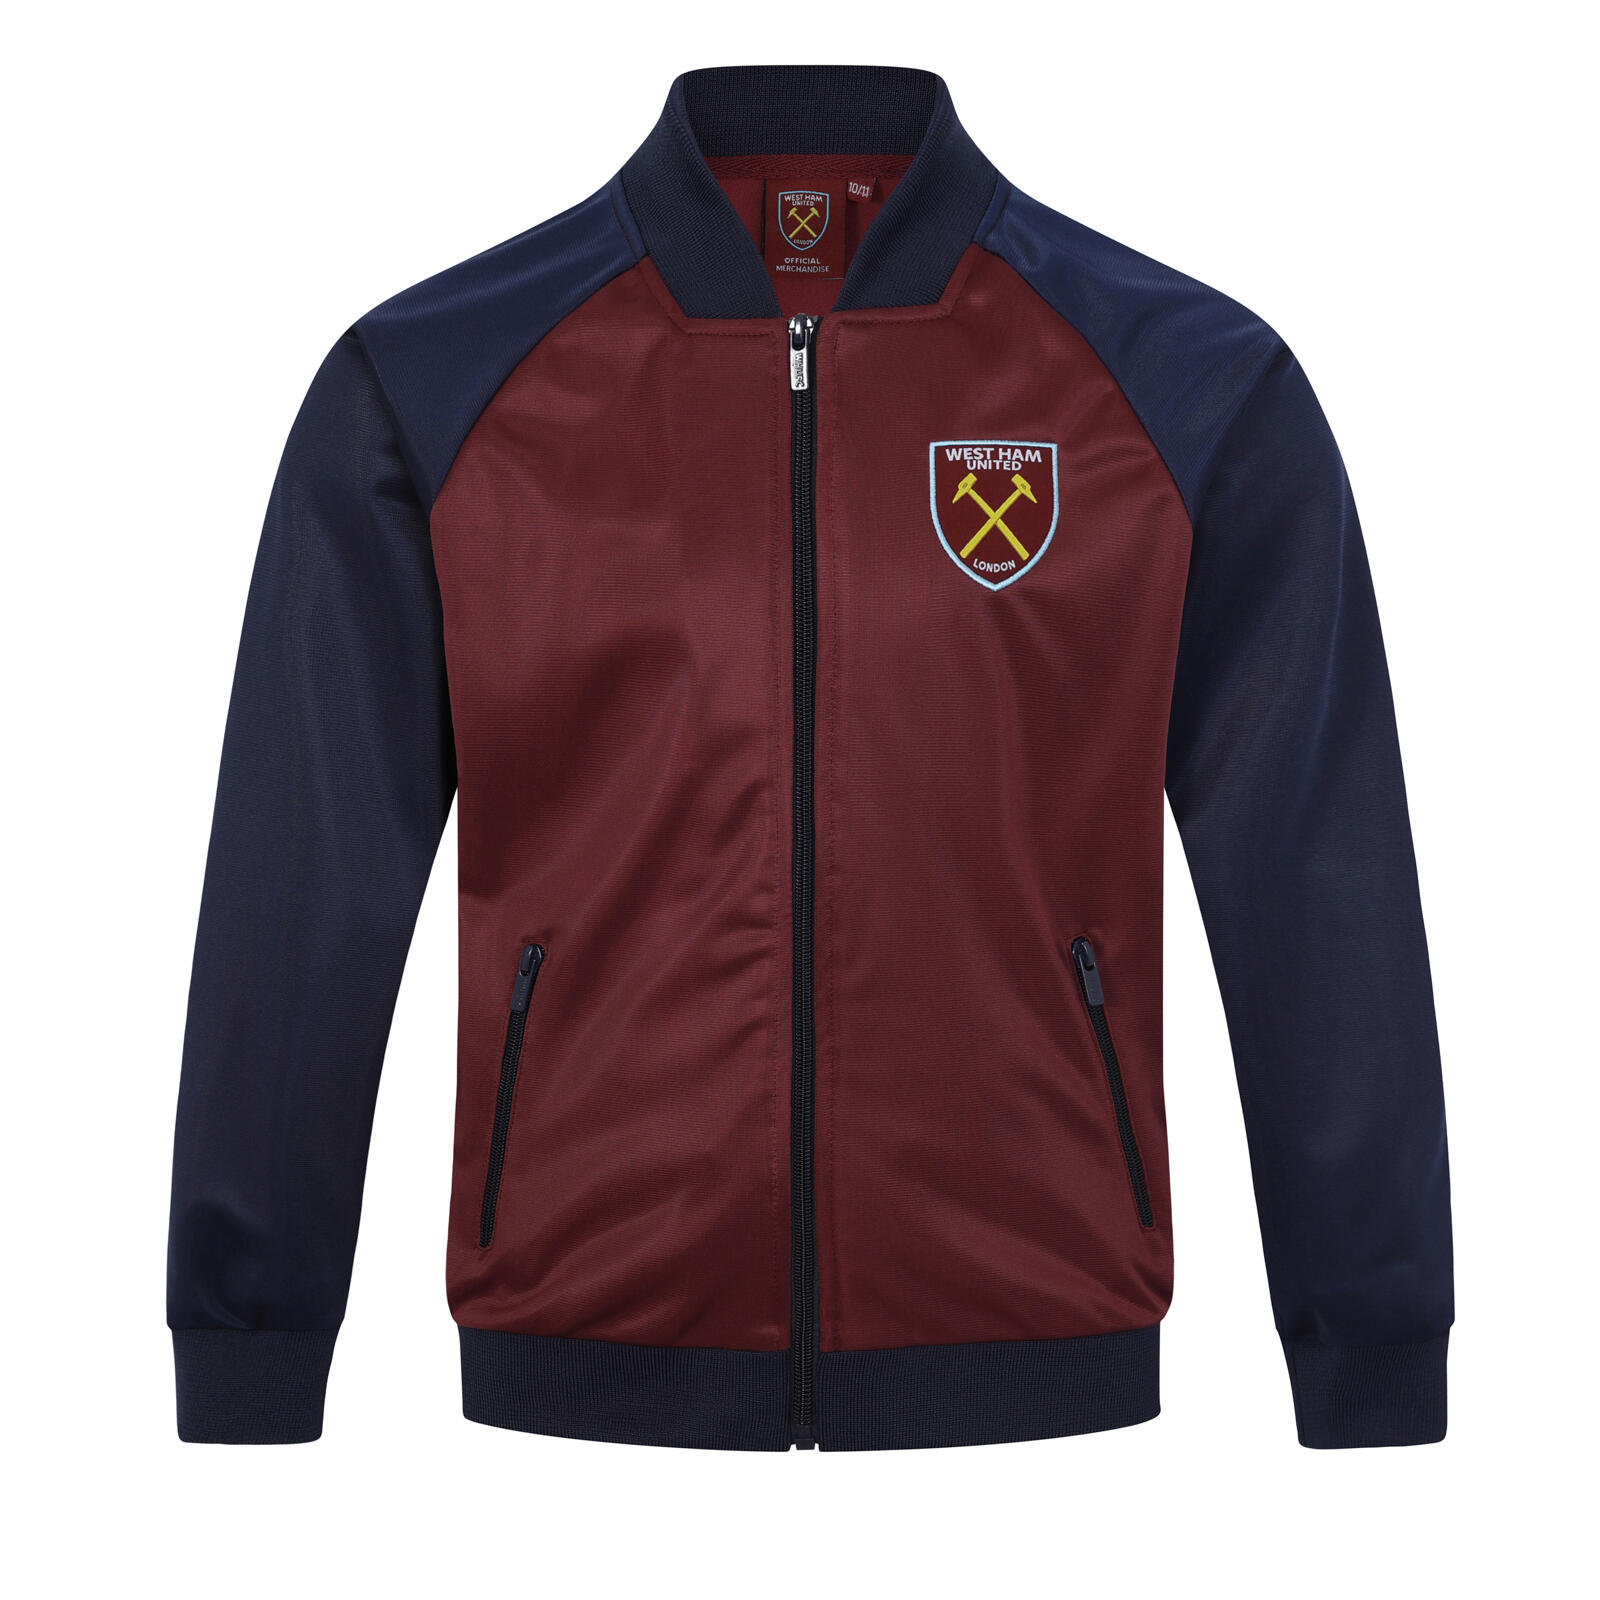 West Ham United Boys Jacket Track Top Retro Kids OFFICIAL Football Gift 1/5